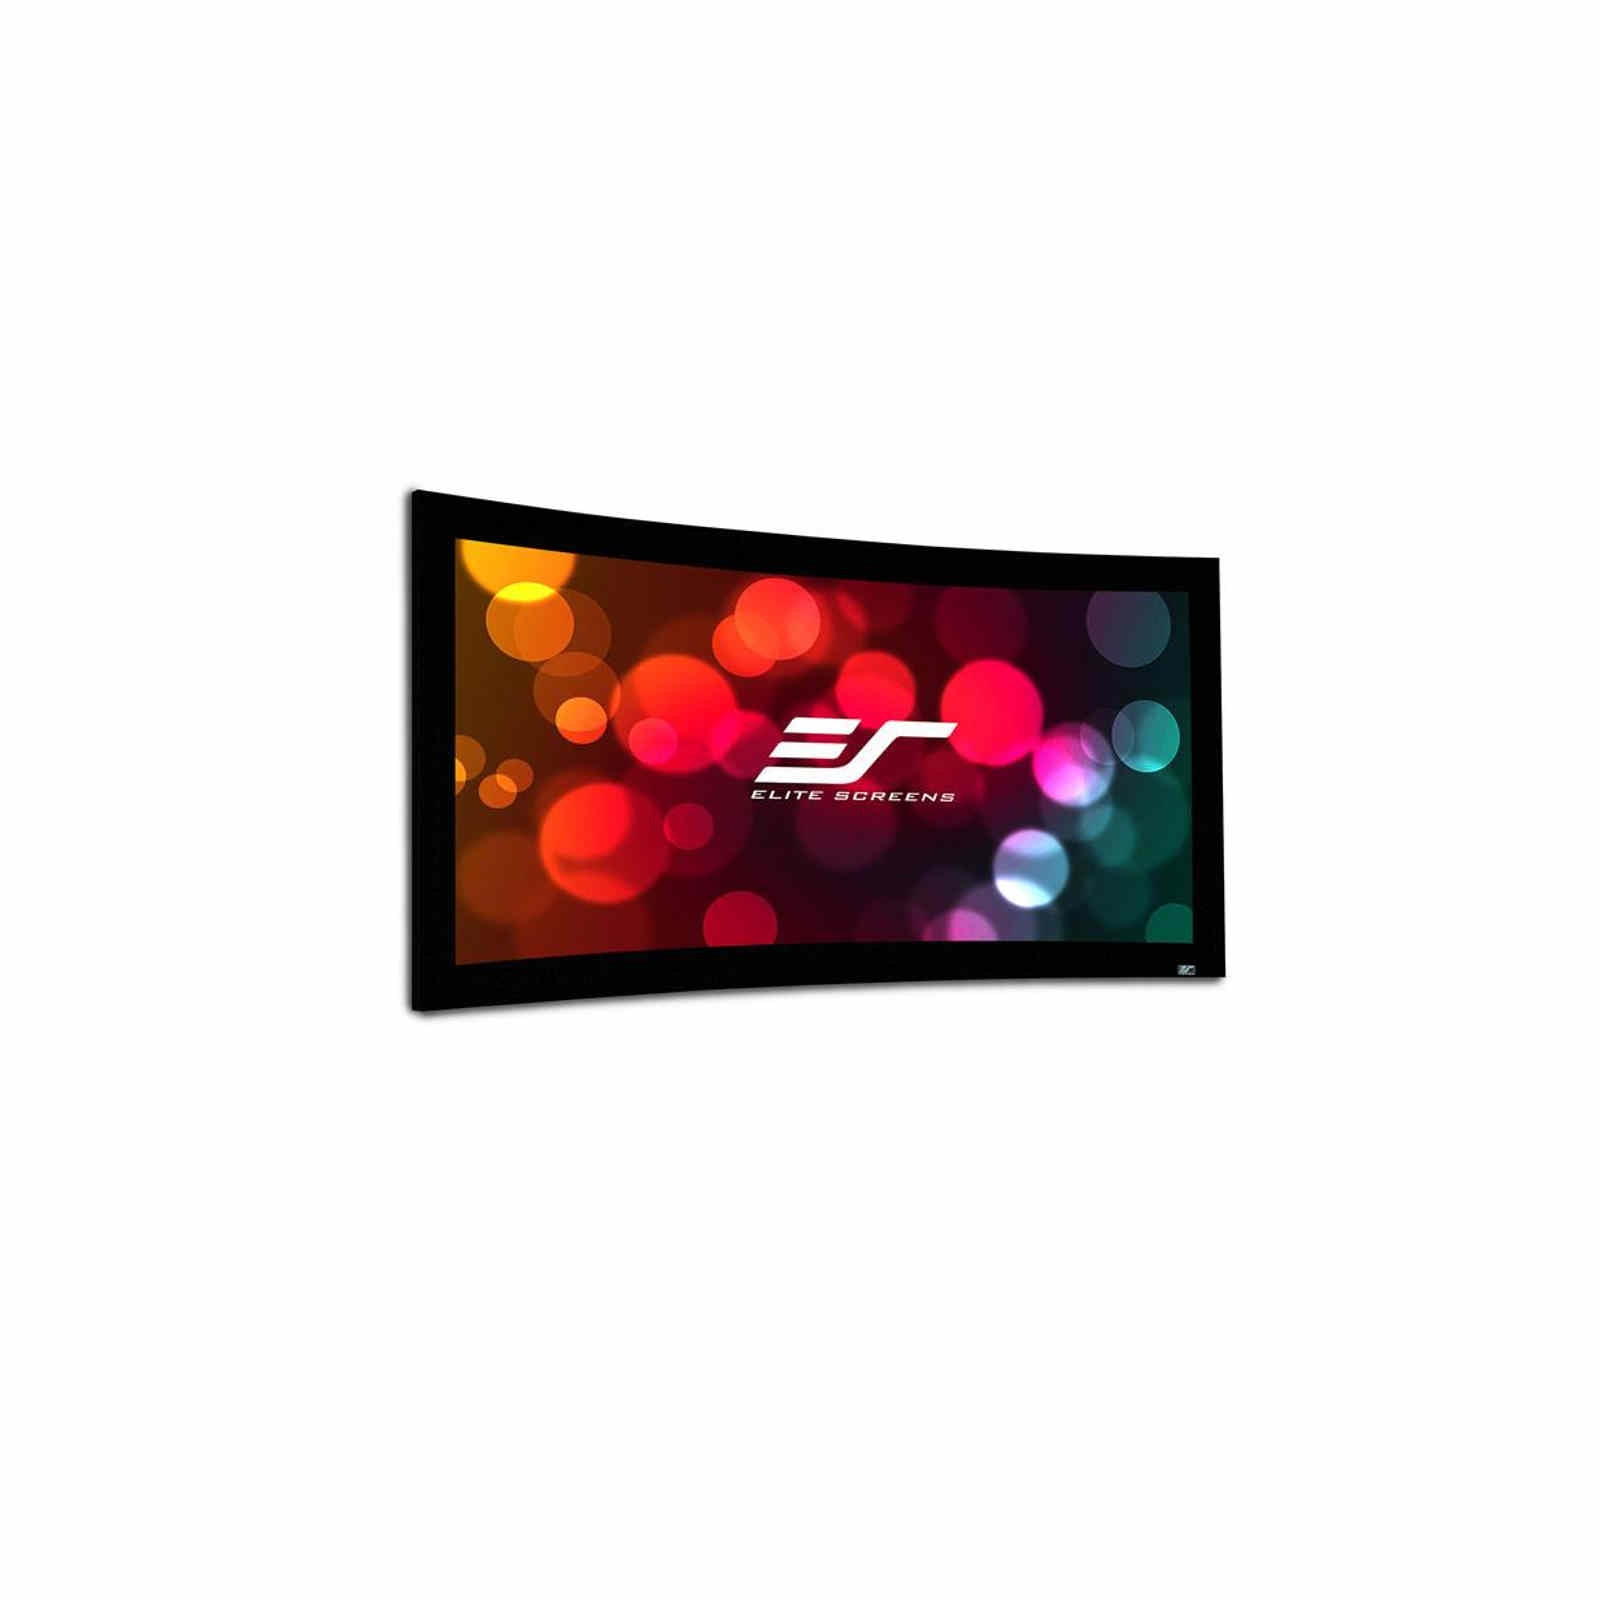 Elite Lunette CineWhite Curved Fixed Frame Projection Screen 92" 16:9 (Curve92WH1) - Ooberpad